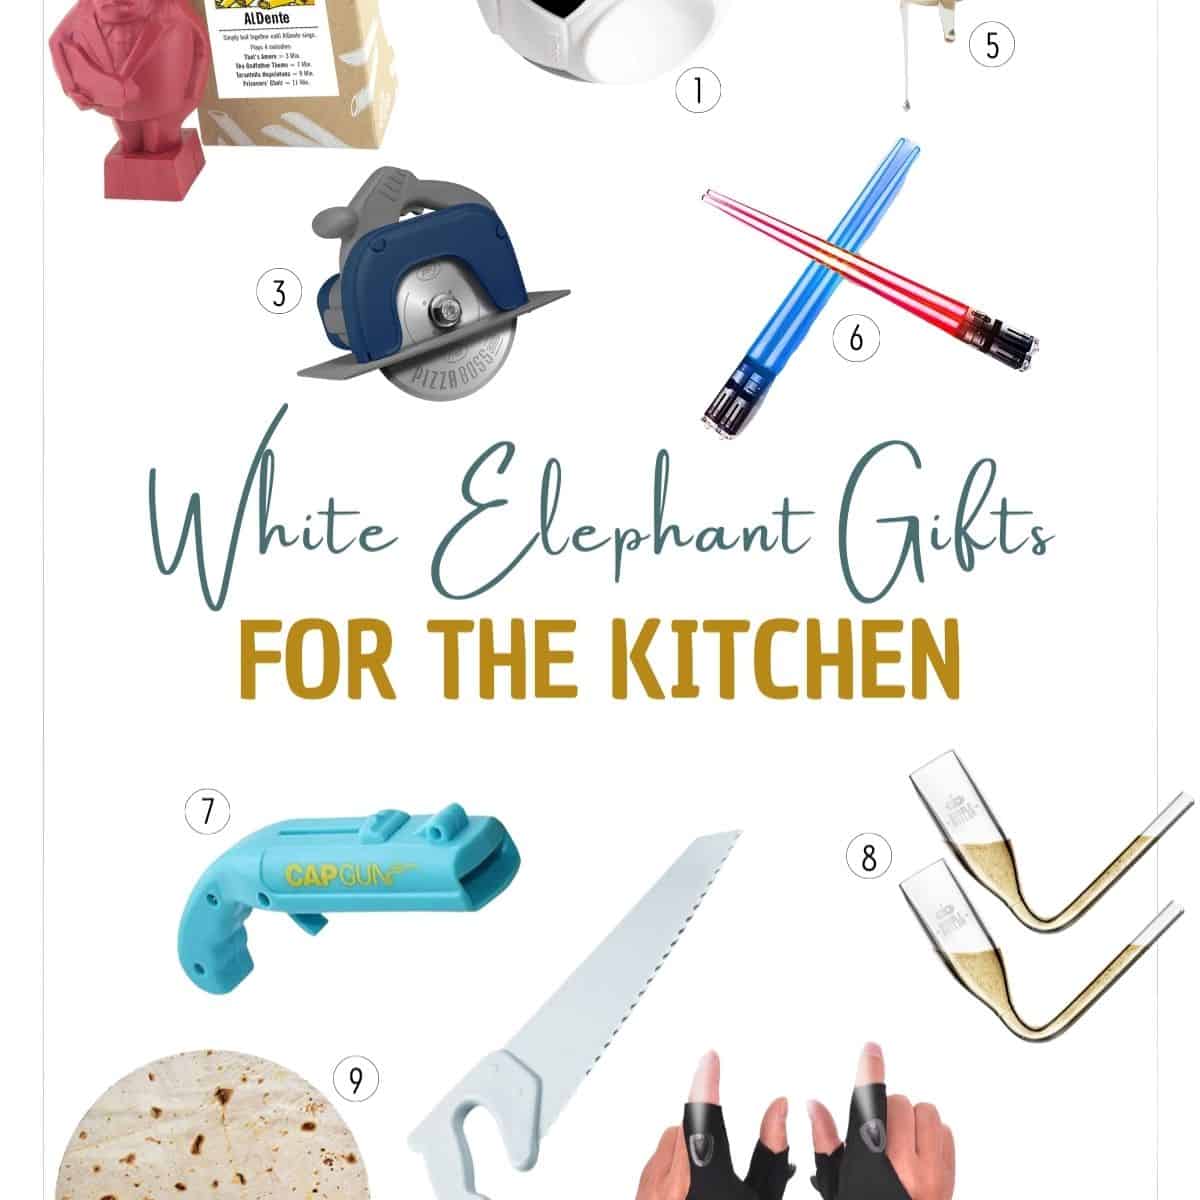 https://www.cupcakesandcutlery.com/wp-content/uploads/2021/11/best-white-elephant-gifts-for-the-kitchen.jpg